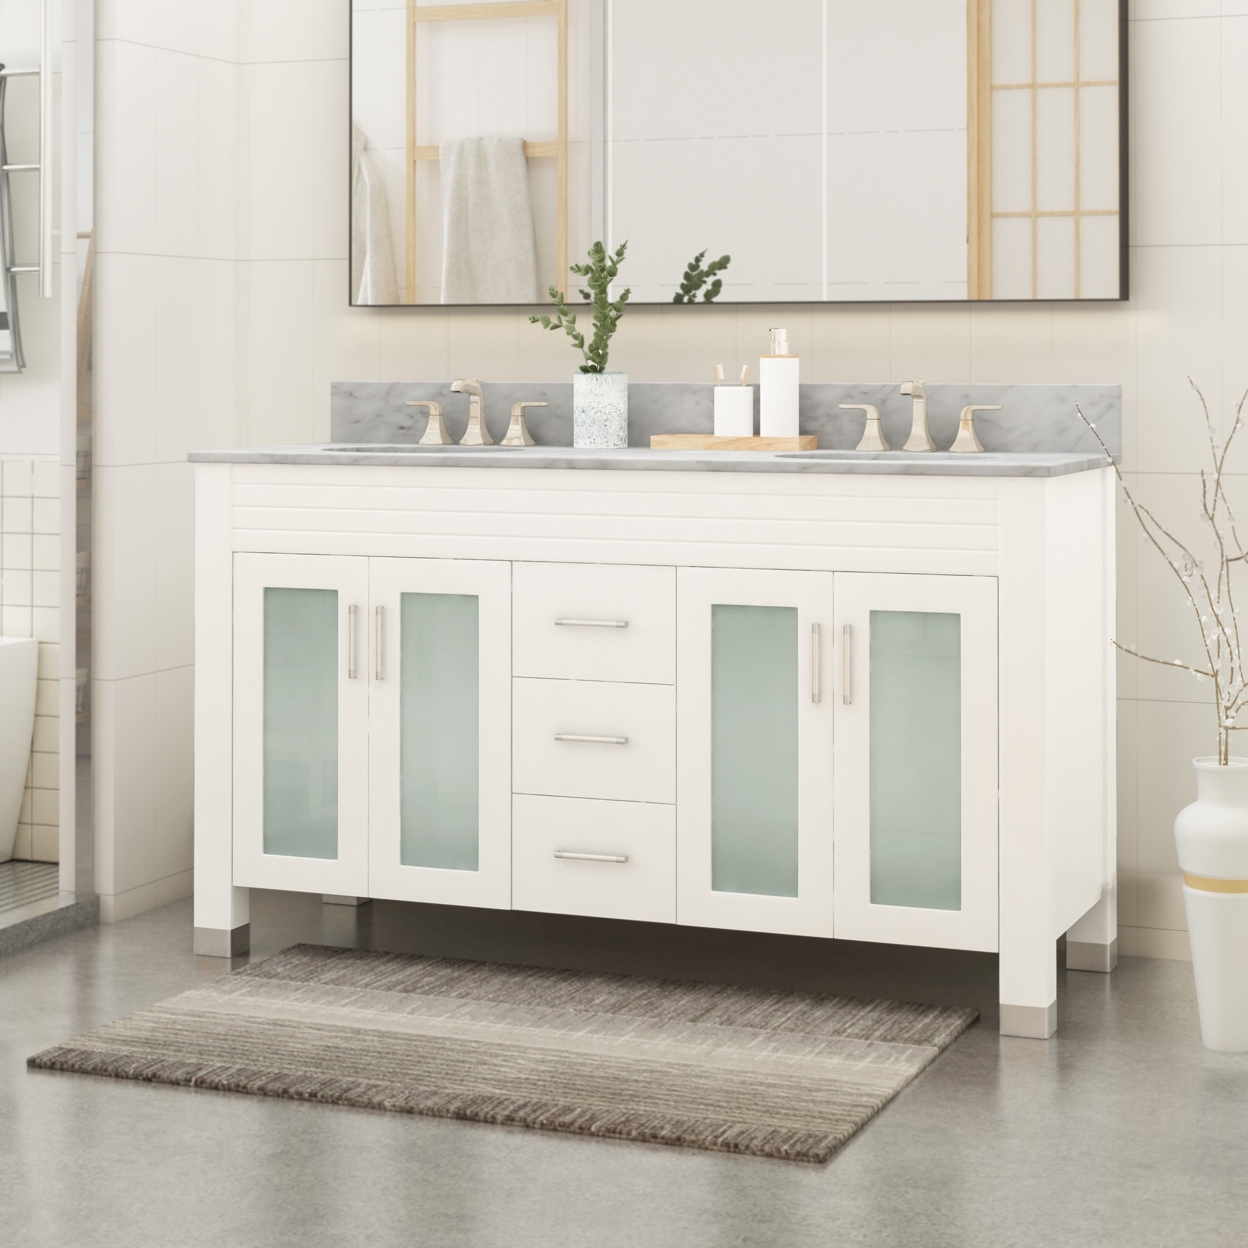 Holdame Contemporary 60 Wood Bathroom Vanity (Counter Top Not Included) - White